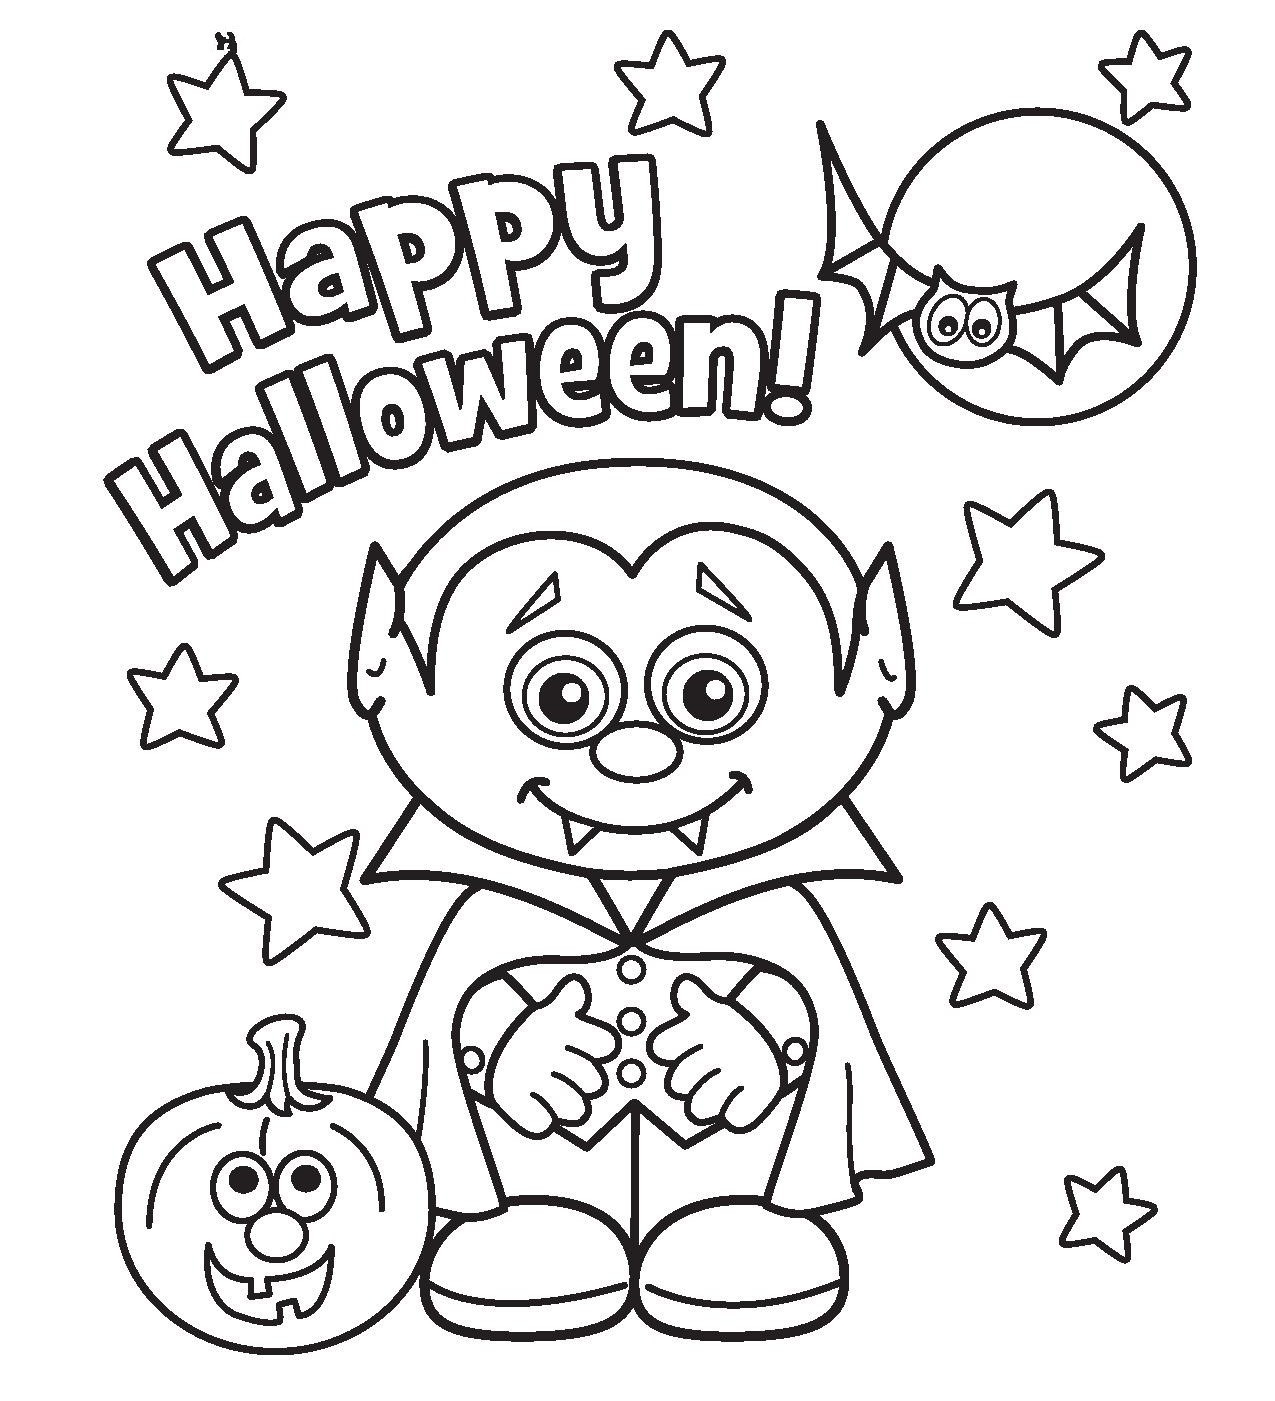 The best free Anxiety coloring page images. Download from 49 free